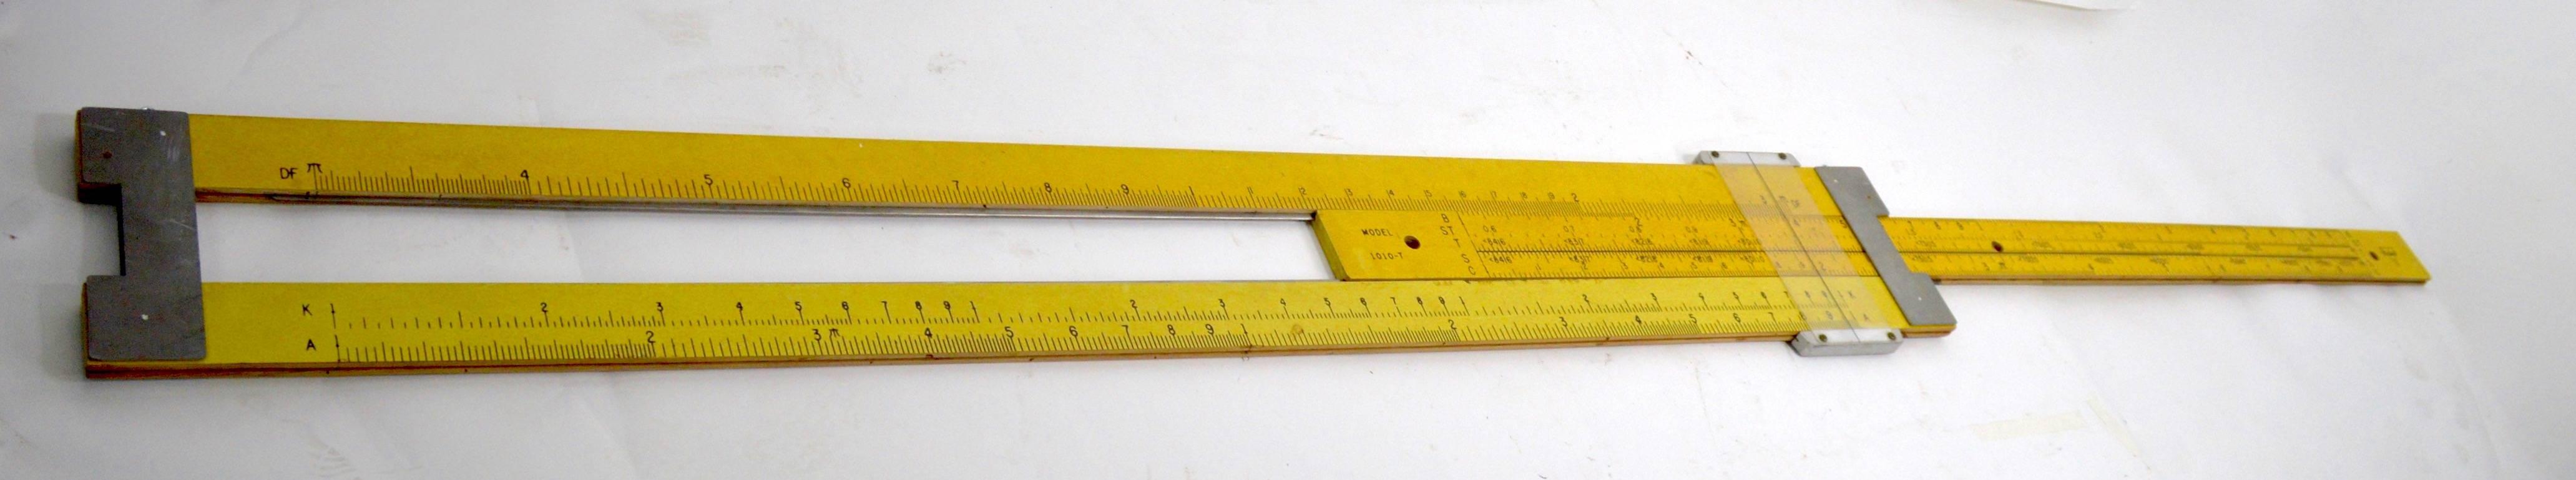 Great graphic over scale slide rule model, generally used as display, or a teaching aid. This example is in very clean, original condition, Model 10-10 ES by Pickett.